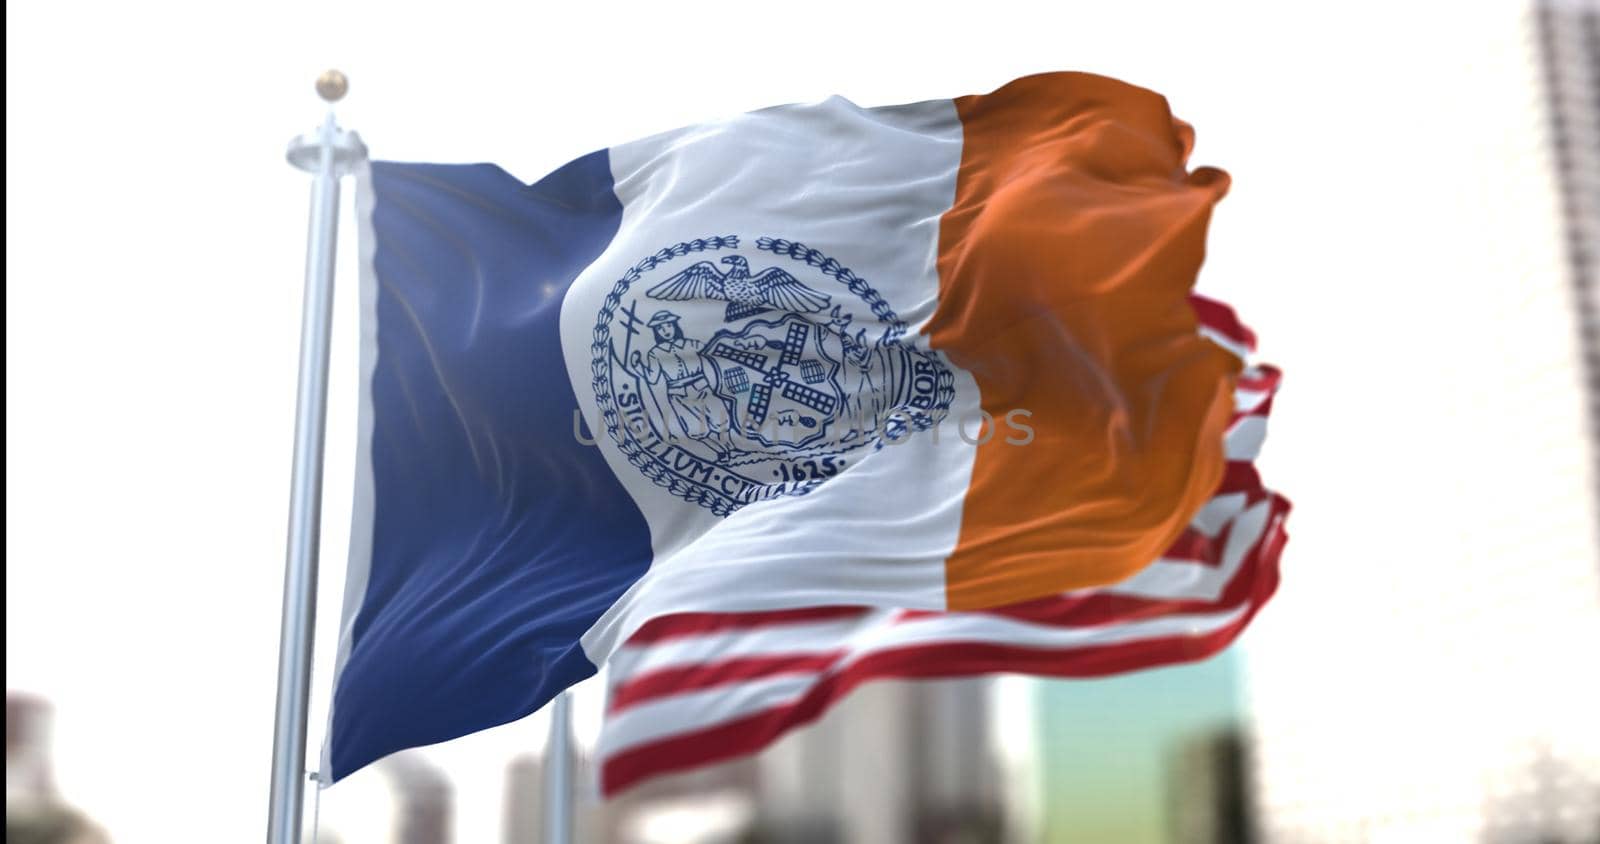 the official flag of New York City flapping along with the American Stars and Stripes national flag in the background. Official seal of New York City. Symbolism and history